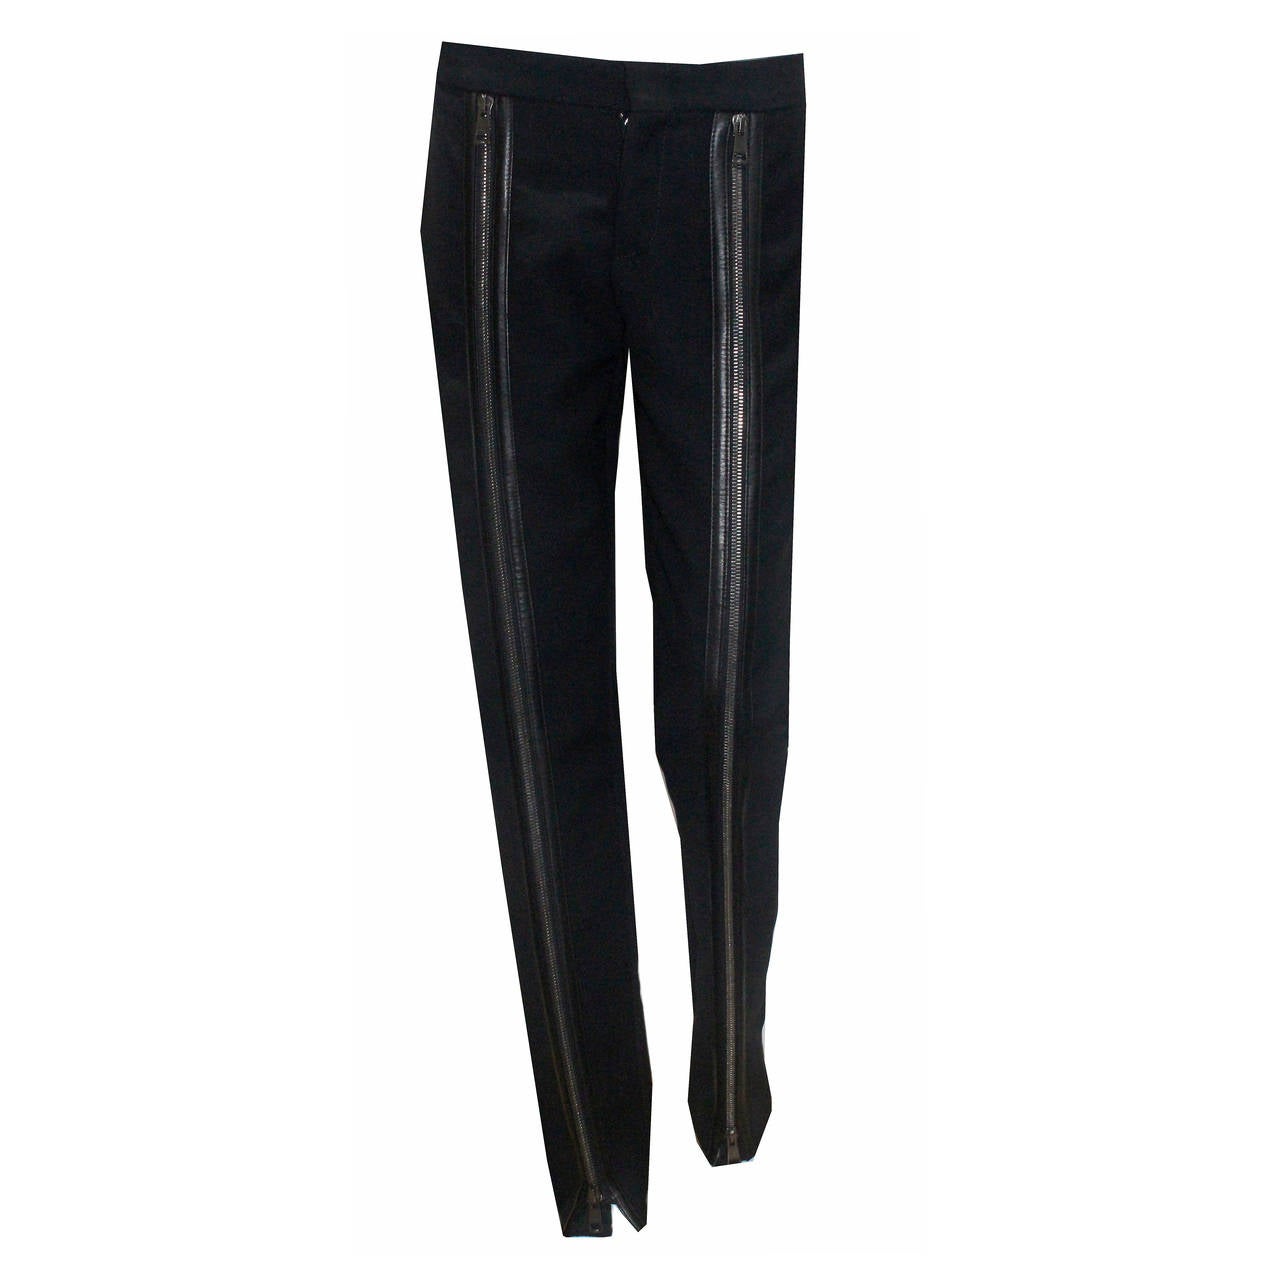 Iconic and rare Tom Ford for Gucci runway zipper leather pants c. 2001 ...